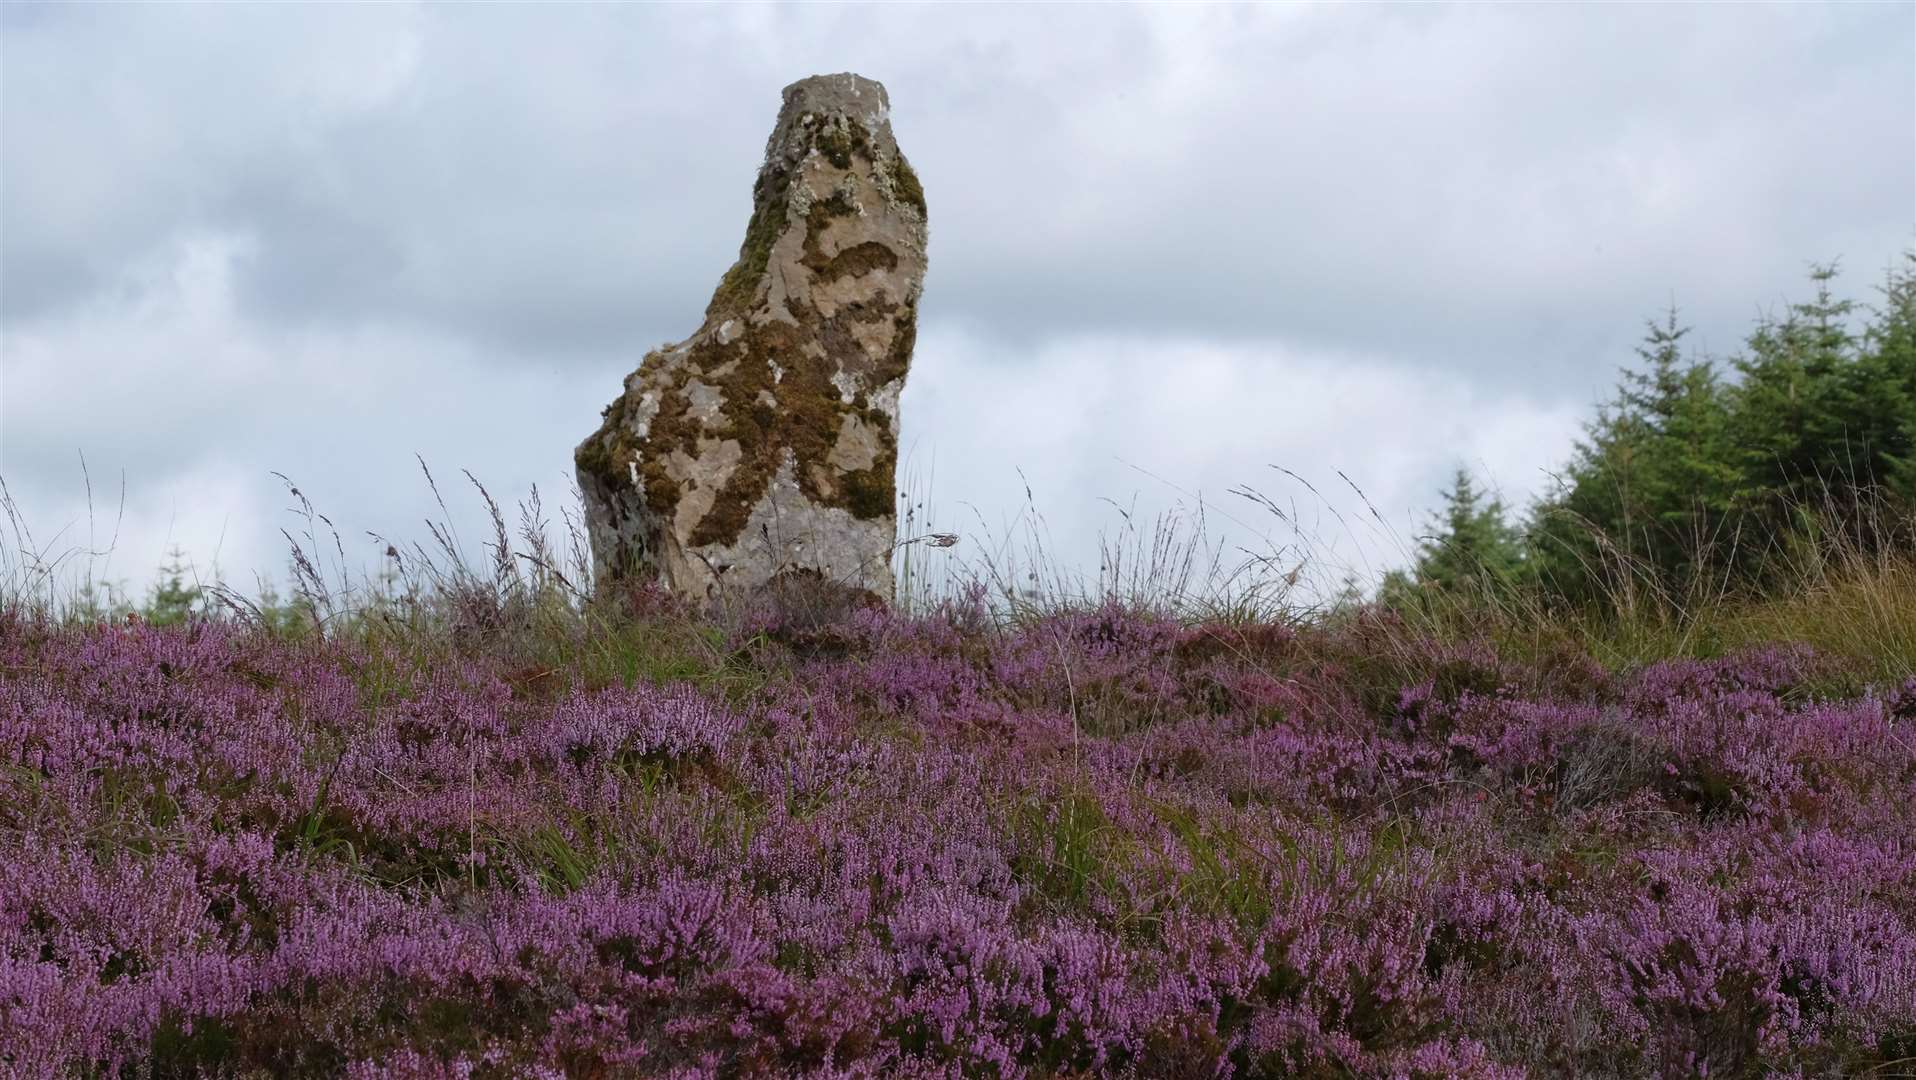 Ian Cameron took this photo of a standing stone and heather near Broubster.